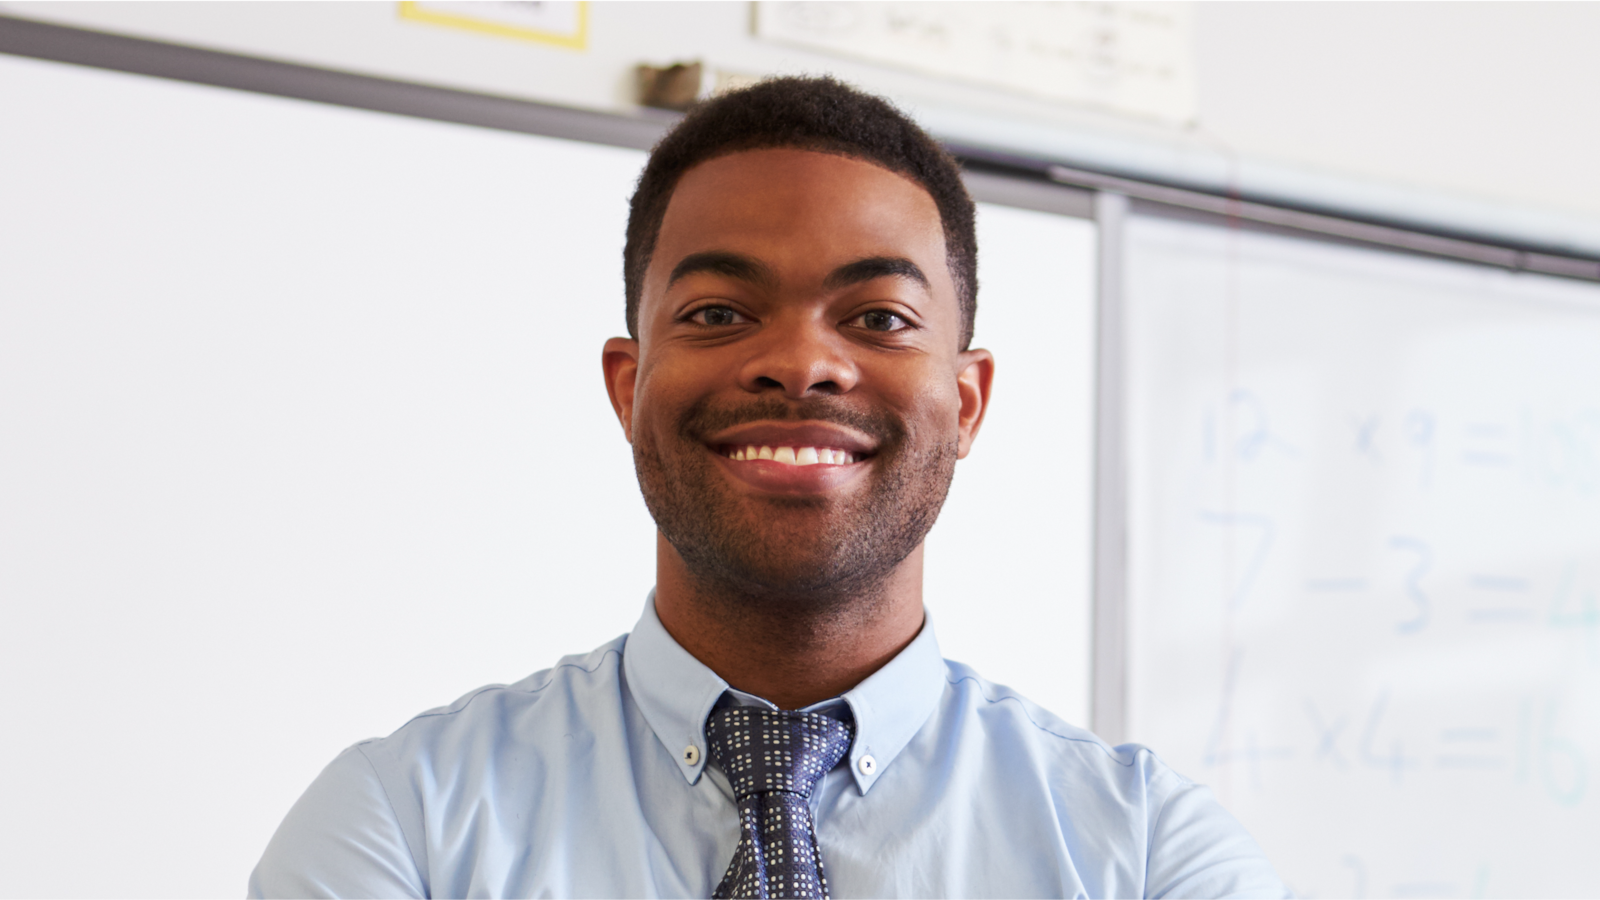 A teacher smiles and stands in front of a whiteboard in his classroom.